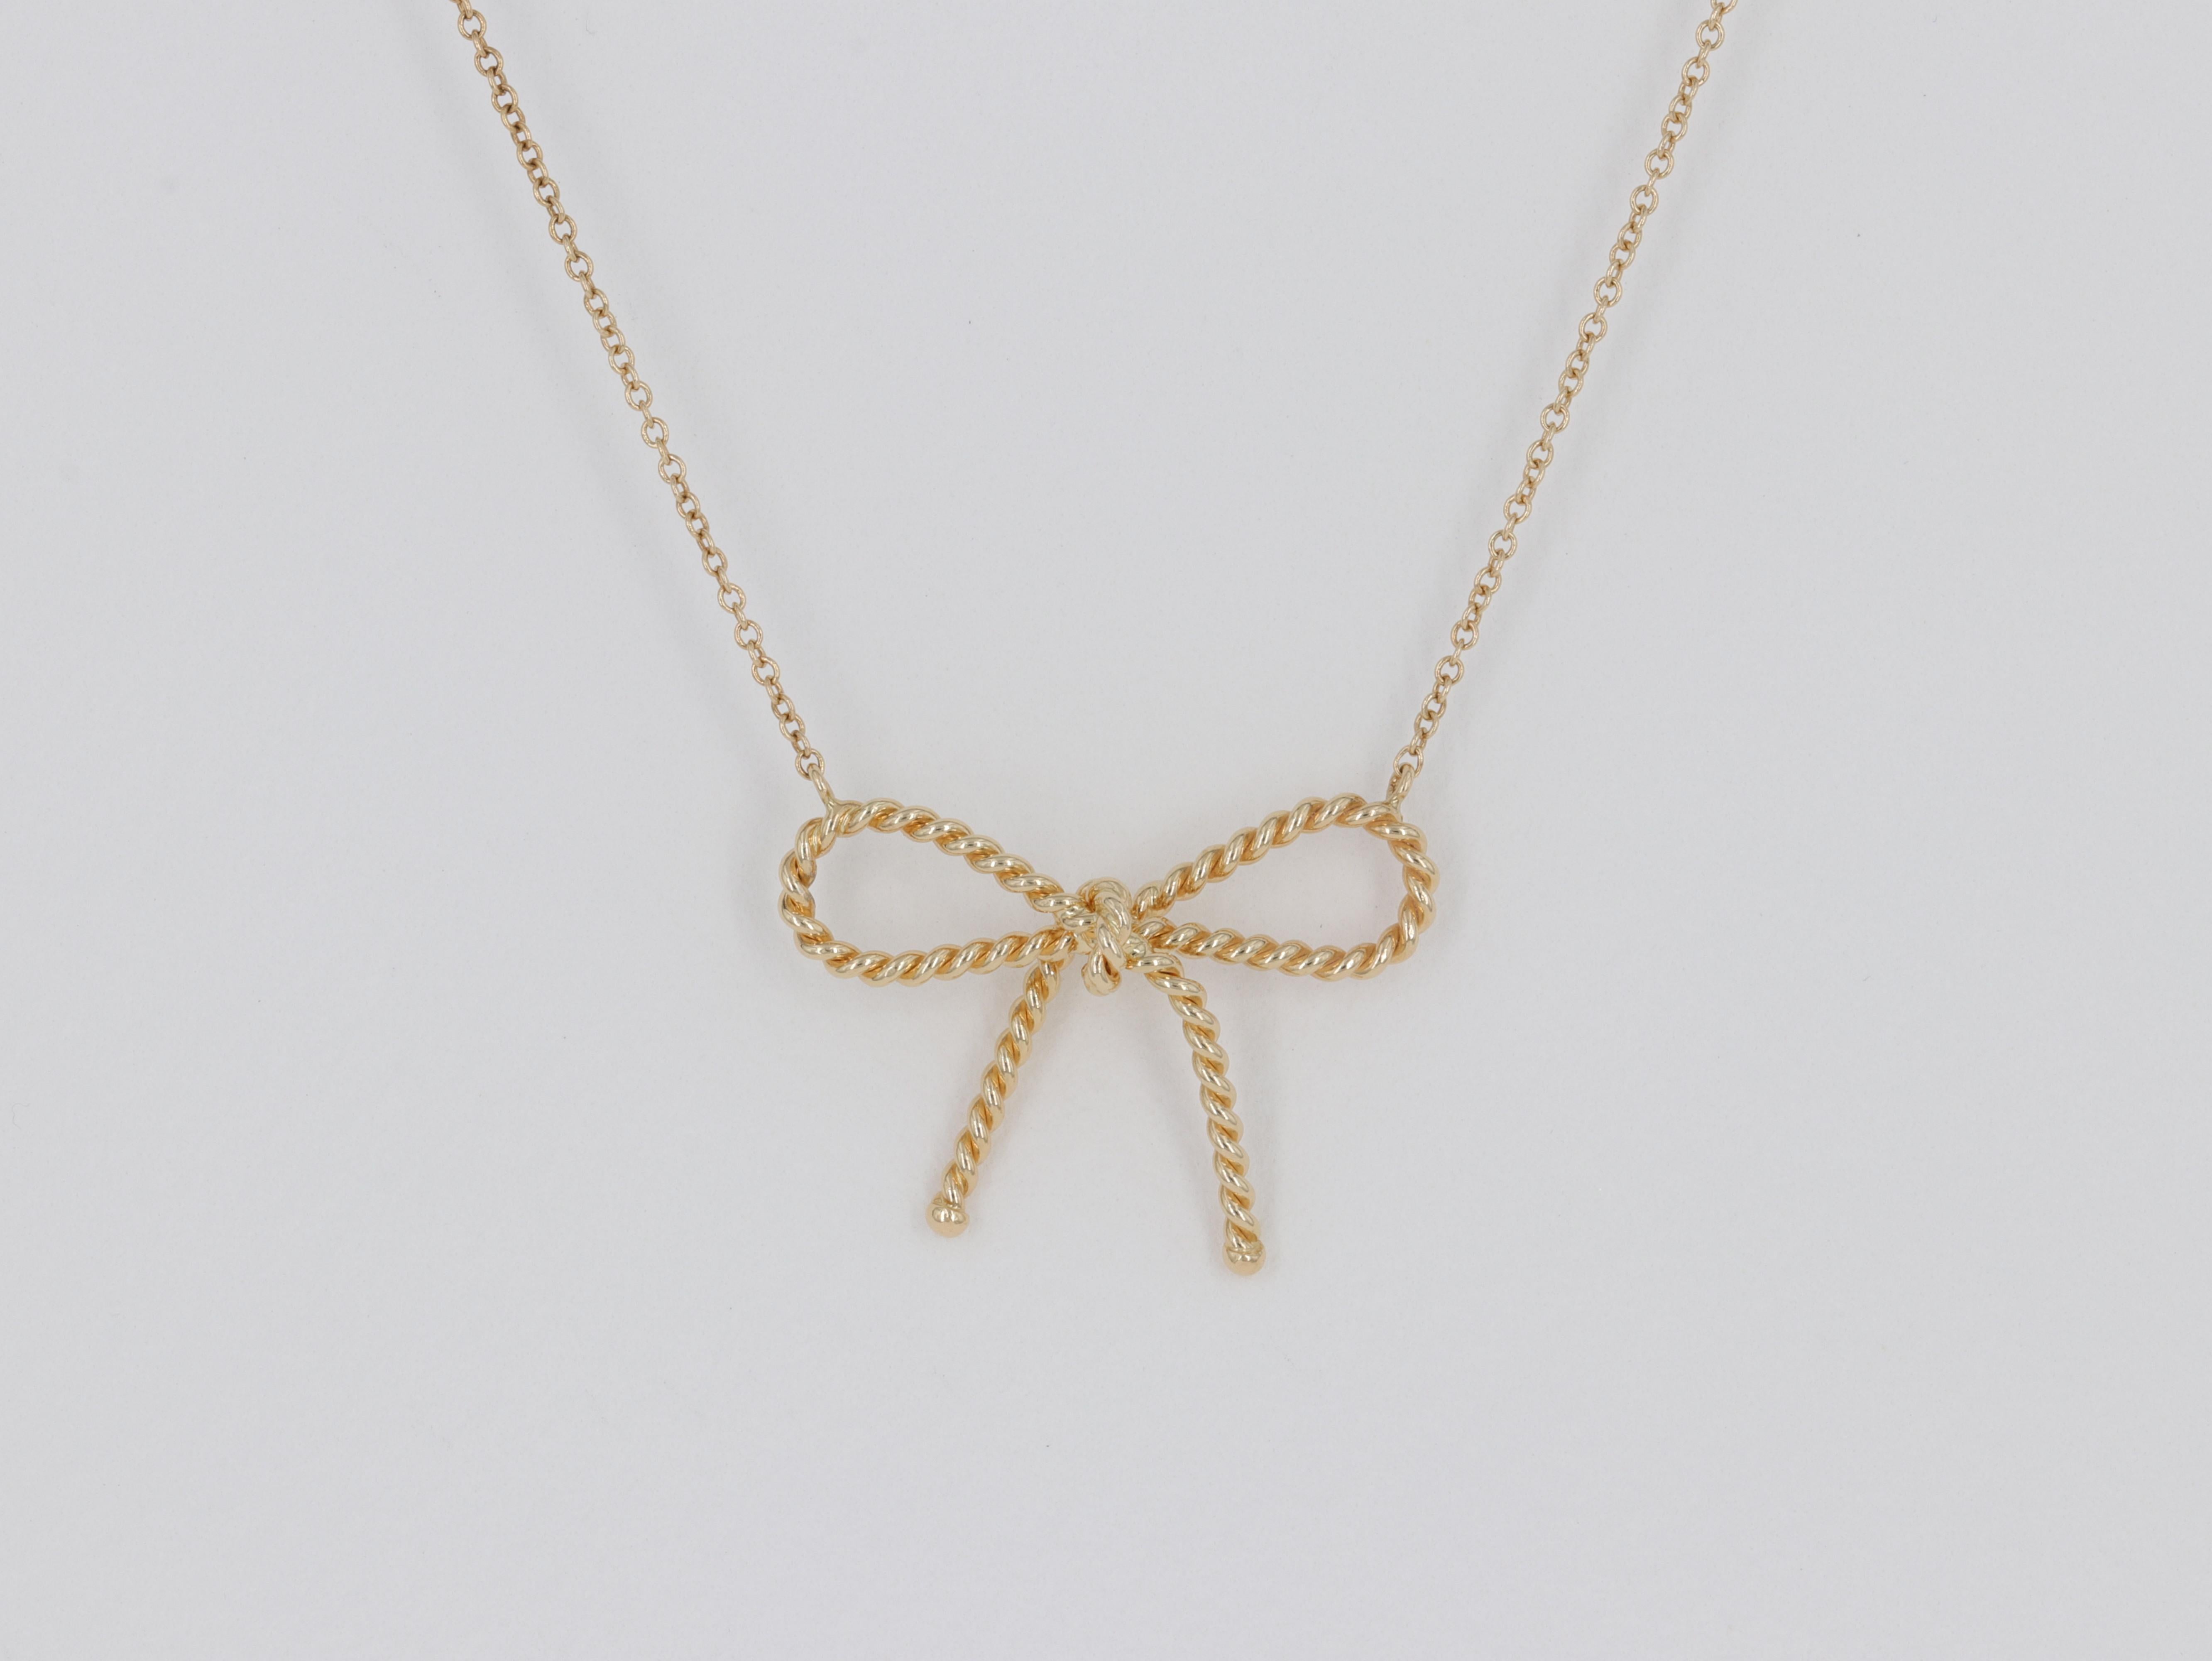 Tiffany & Co. Rope Bow Pendant Necklace in 18 Karat Yellow Gold 

The perfect size, this Tiffany & Co. rope bow necklace crafted in solid 18 karat yellow gold, is a great addition to layer with a stack of necklaces or worn alone. The twisted rope